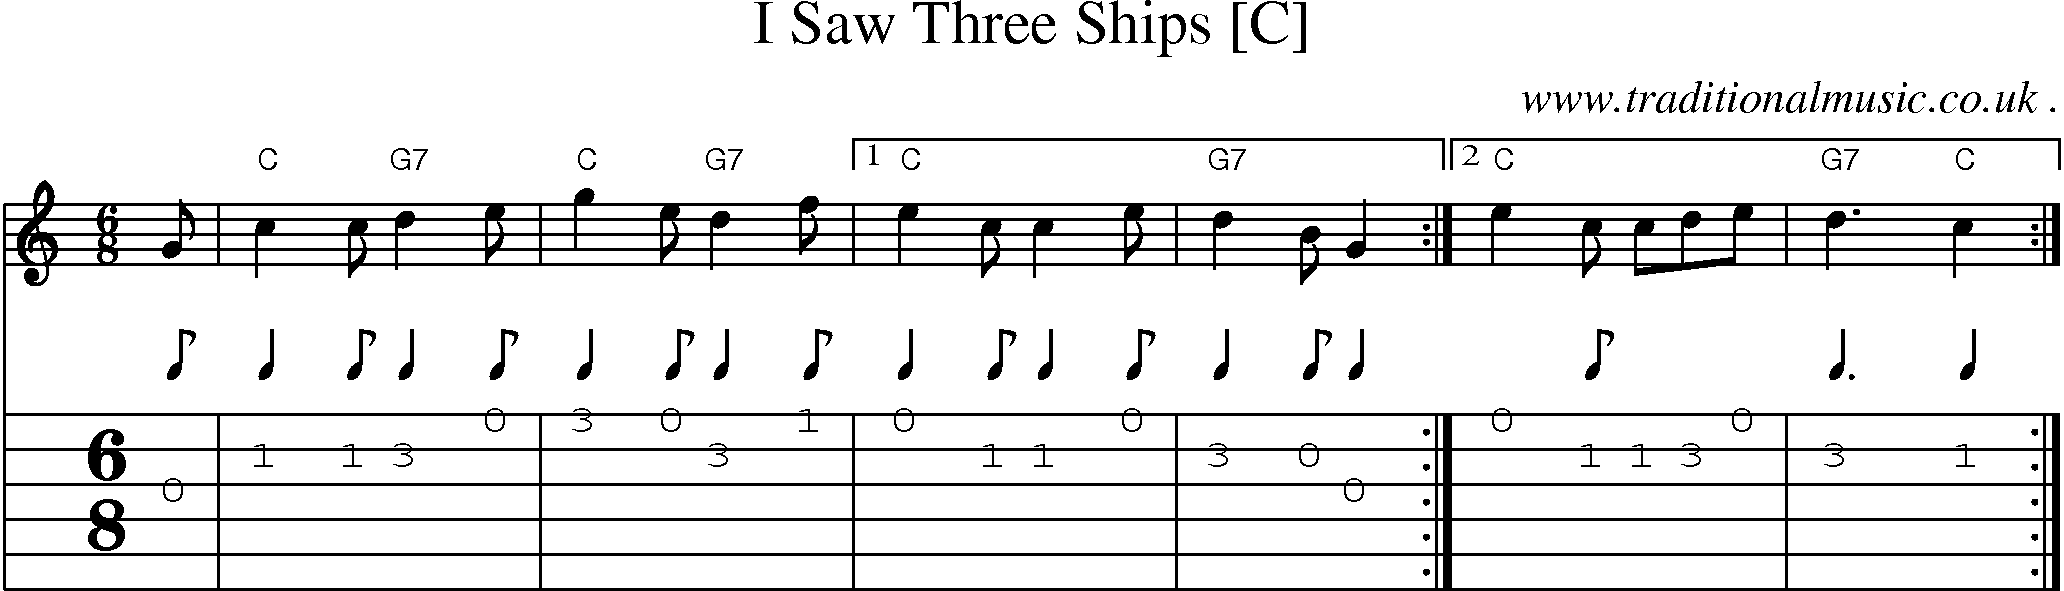 Sheet-music  score, Chords and Guitar Tabs for I Saw Three Ships [c]